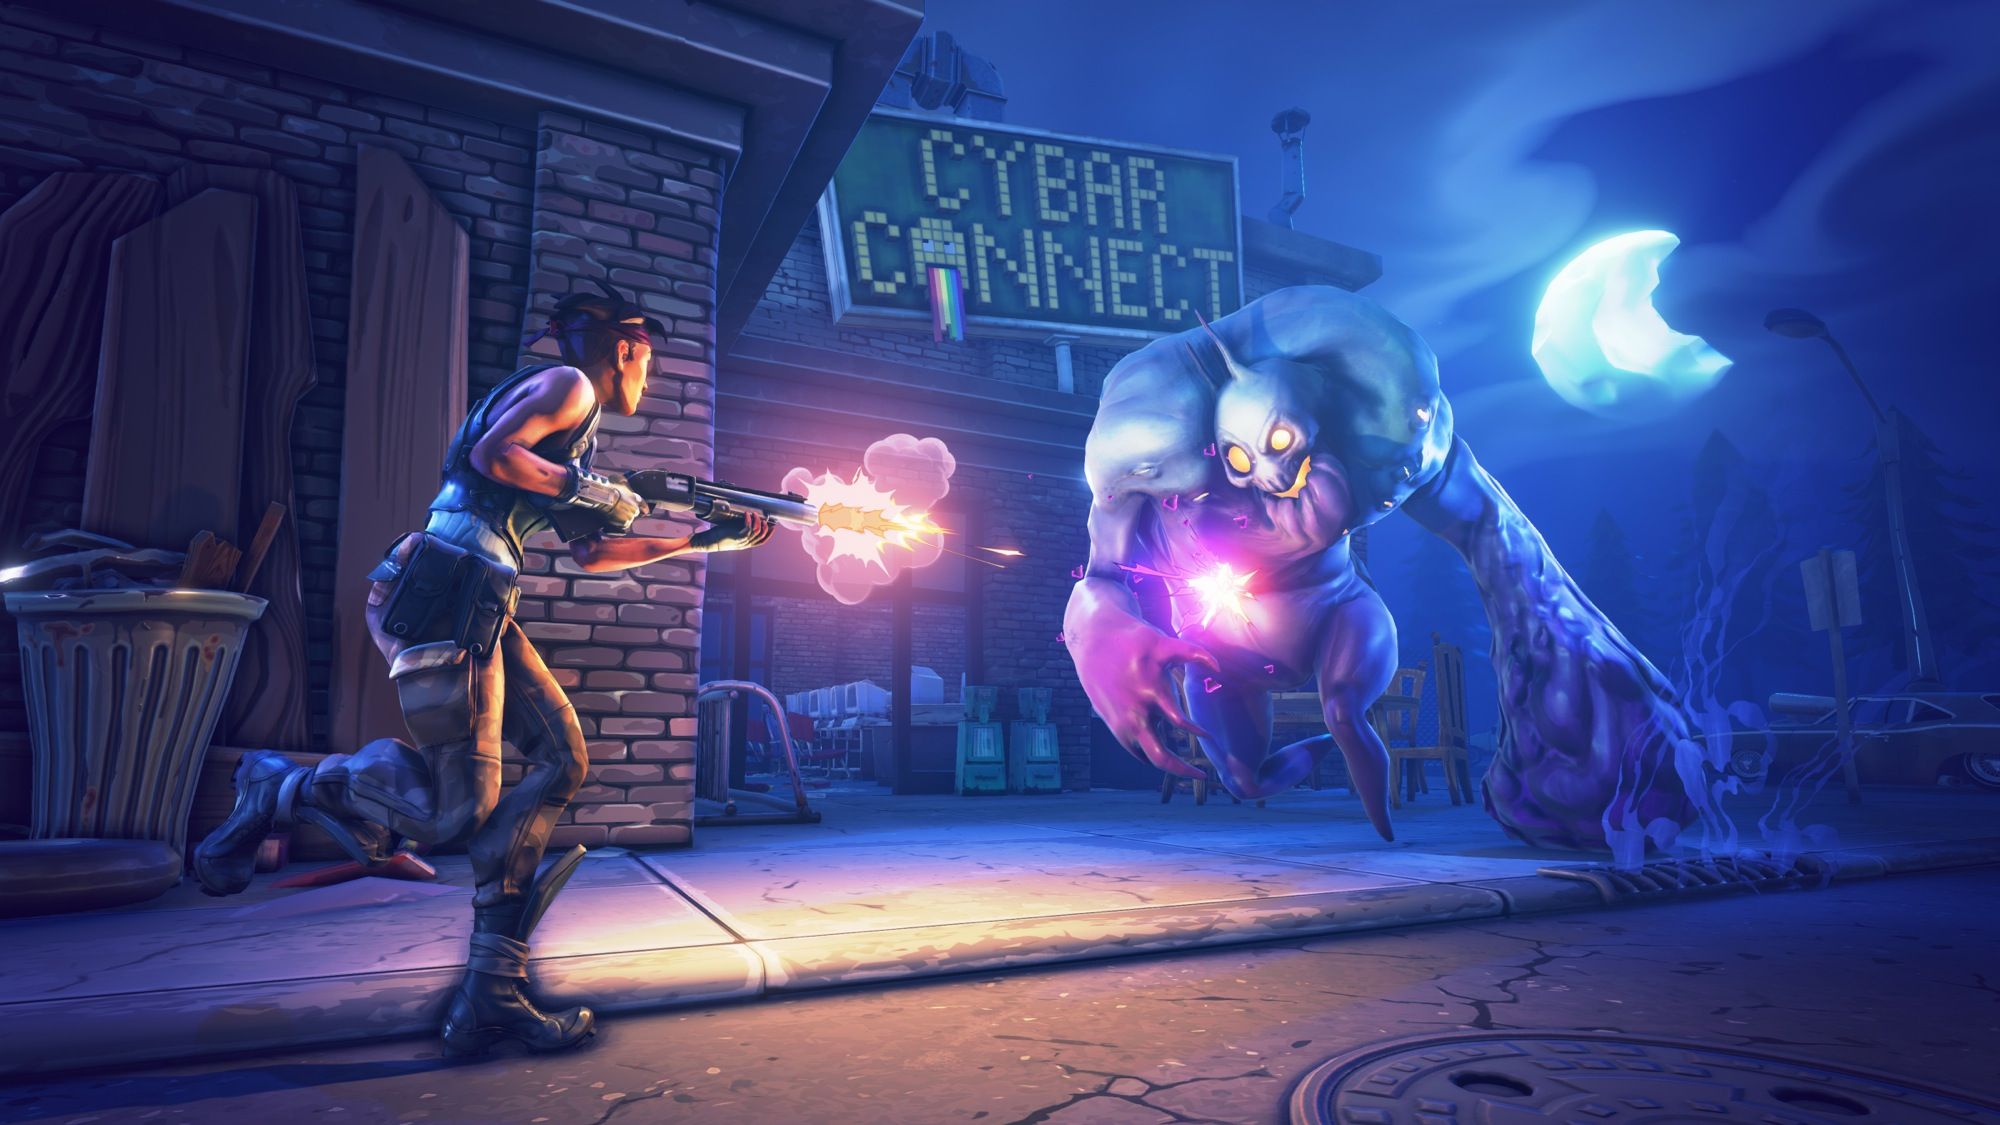 Fortnite Cross Play With Xbox One, PC, Mobile Versions Is Coming